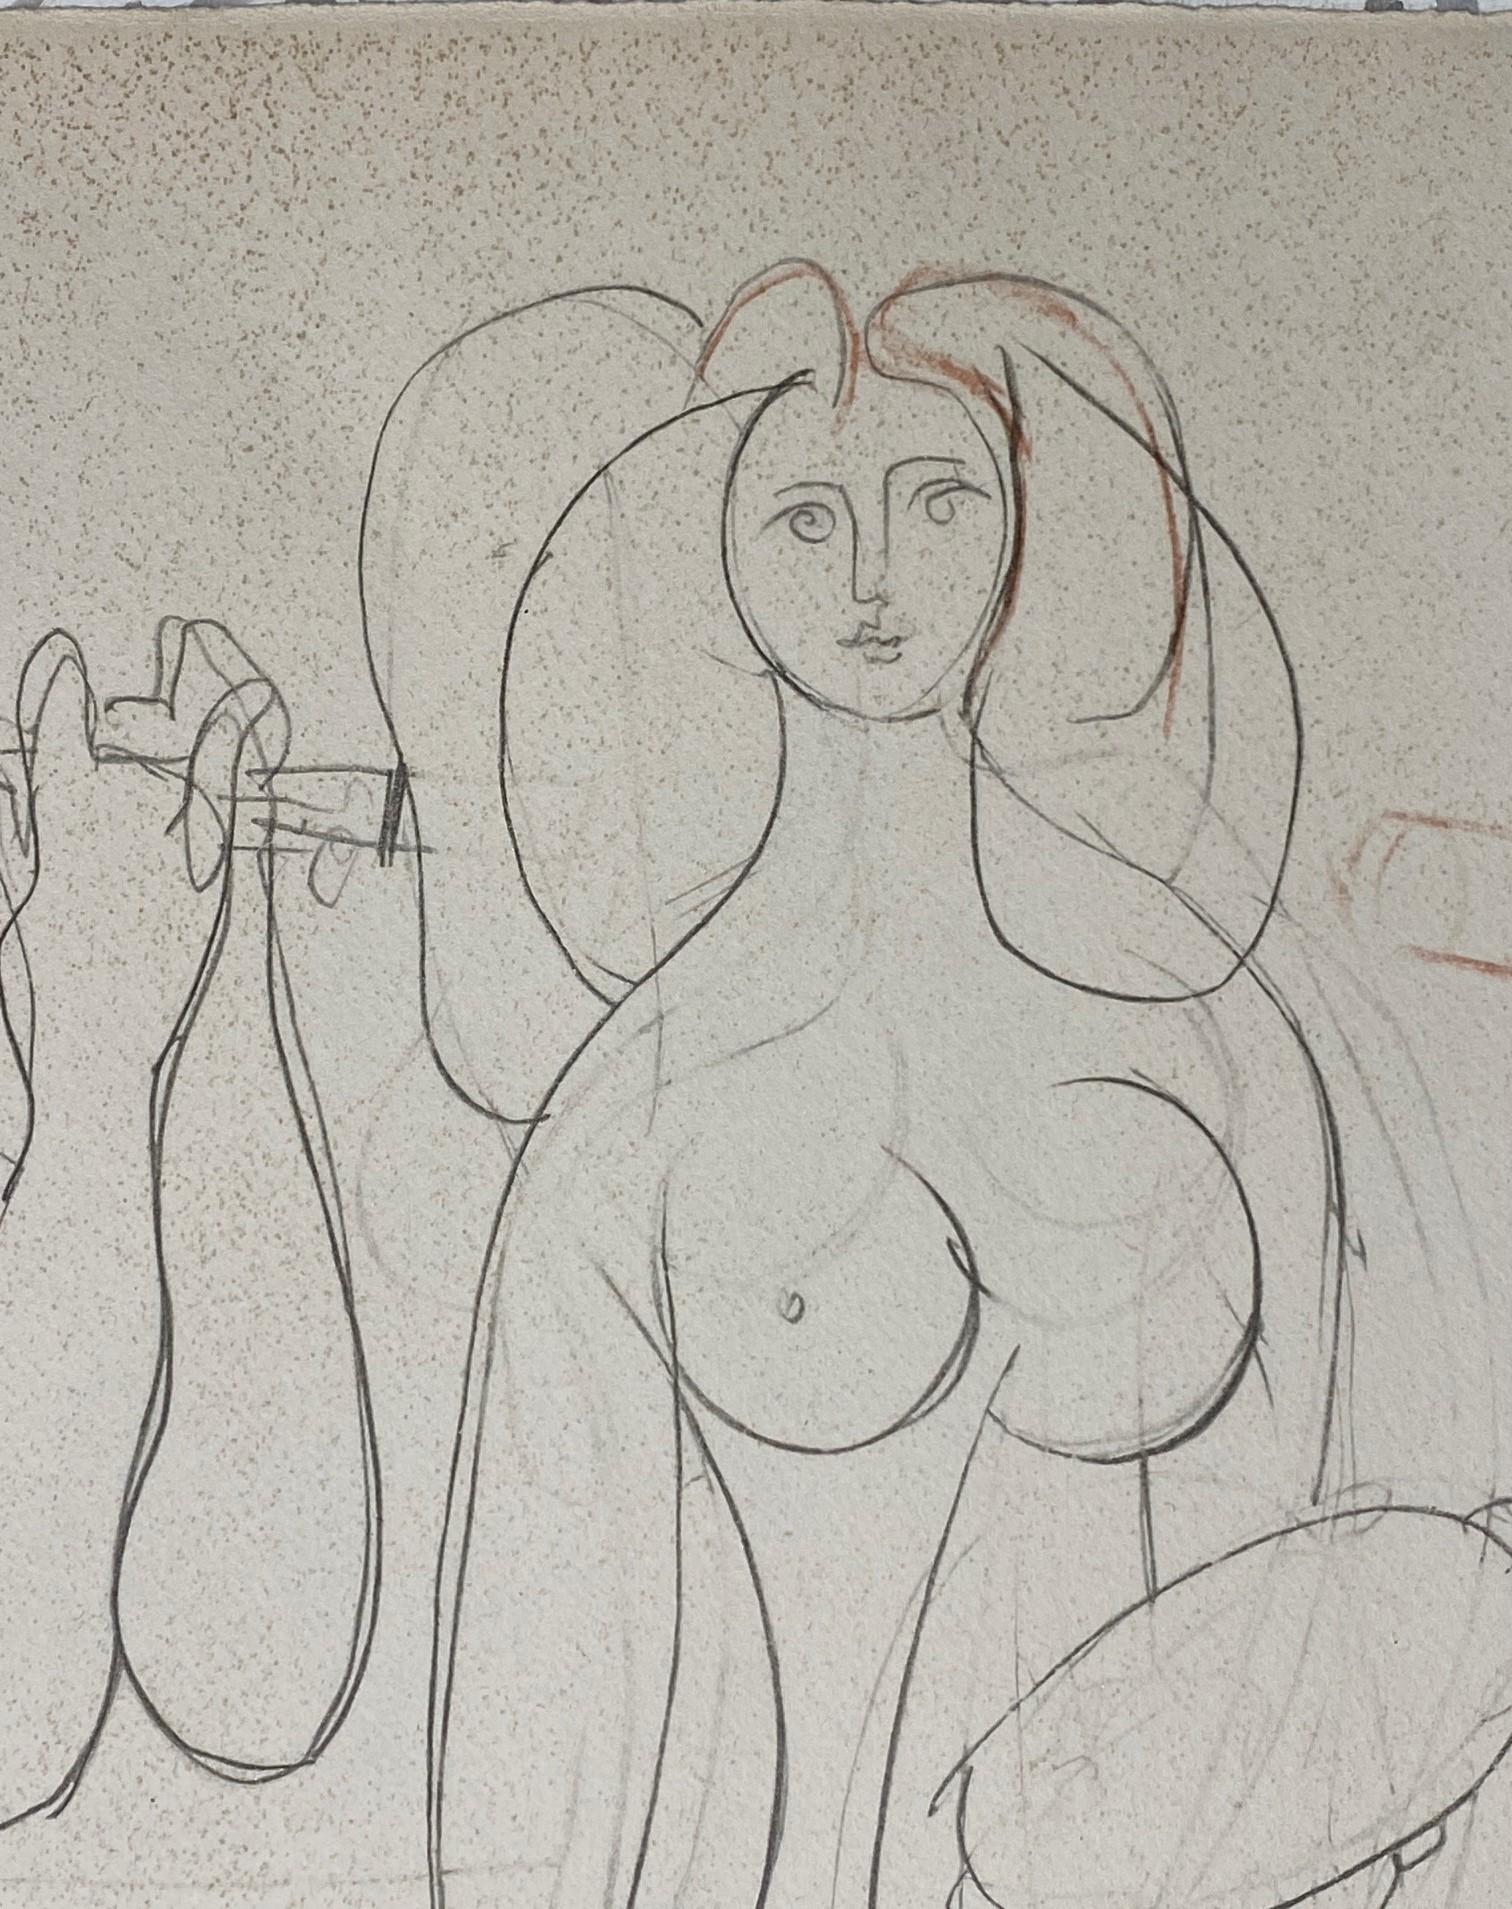 Paper Pablo Picasso Limited Ed. Lithograph From Portfolio Les Dessins D'Antibes, 1958 For Sale